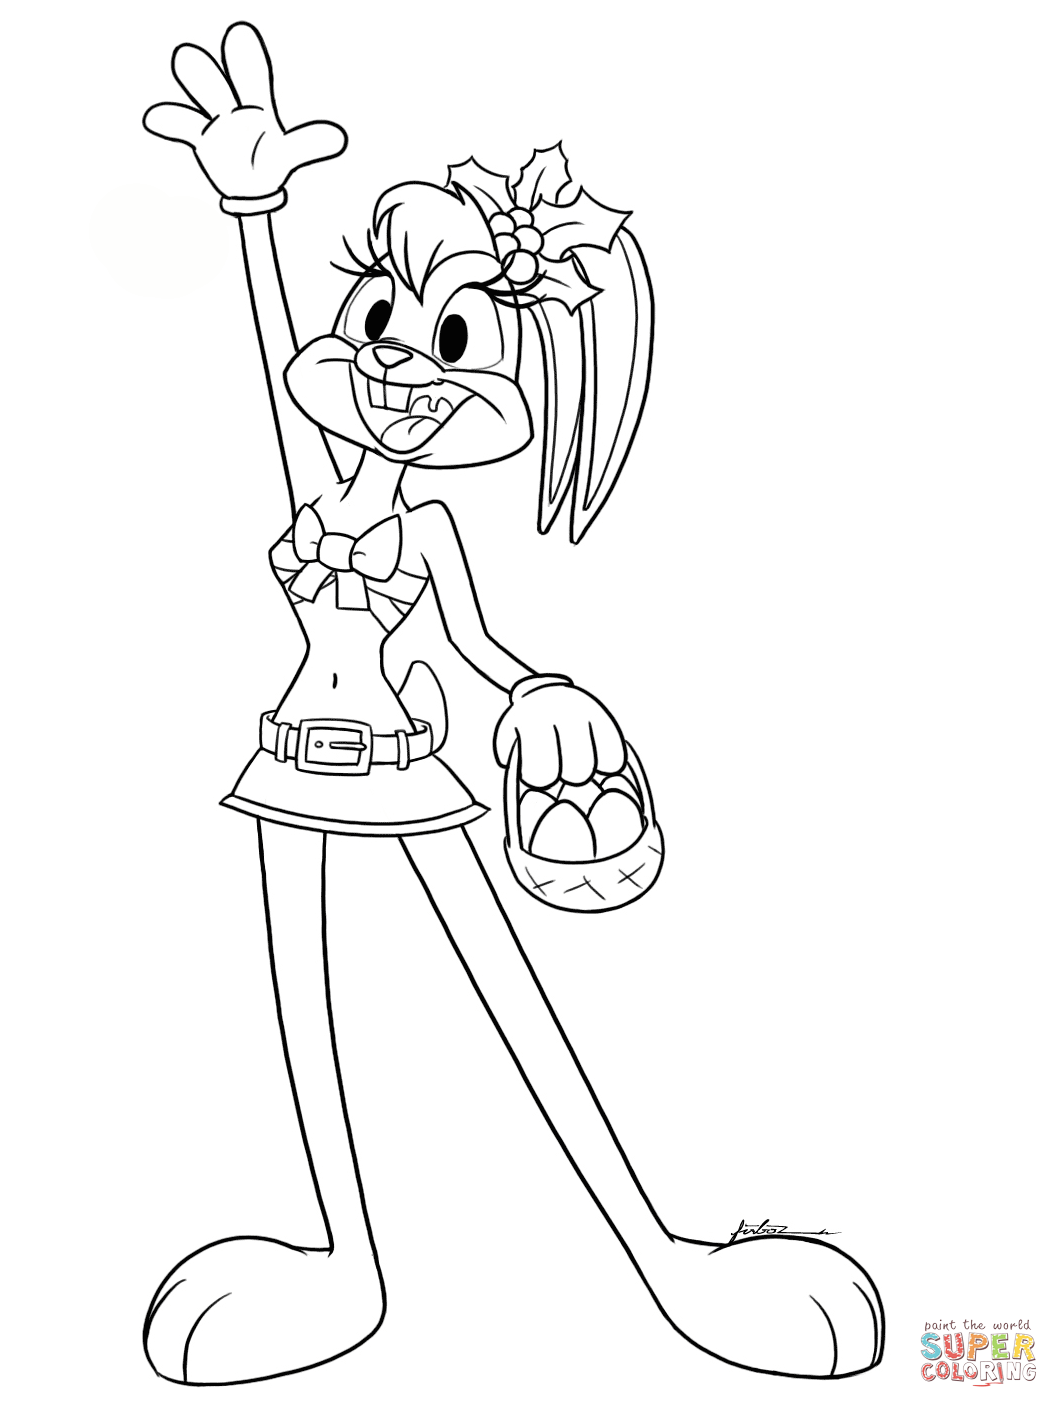 Looney Tunes Lola Bunny coloring page | Free Printable Coloring Pages